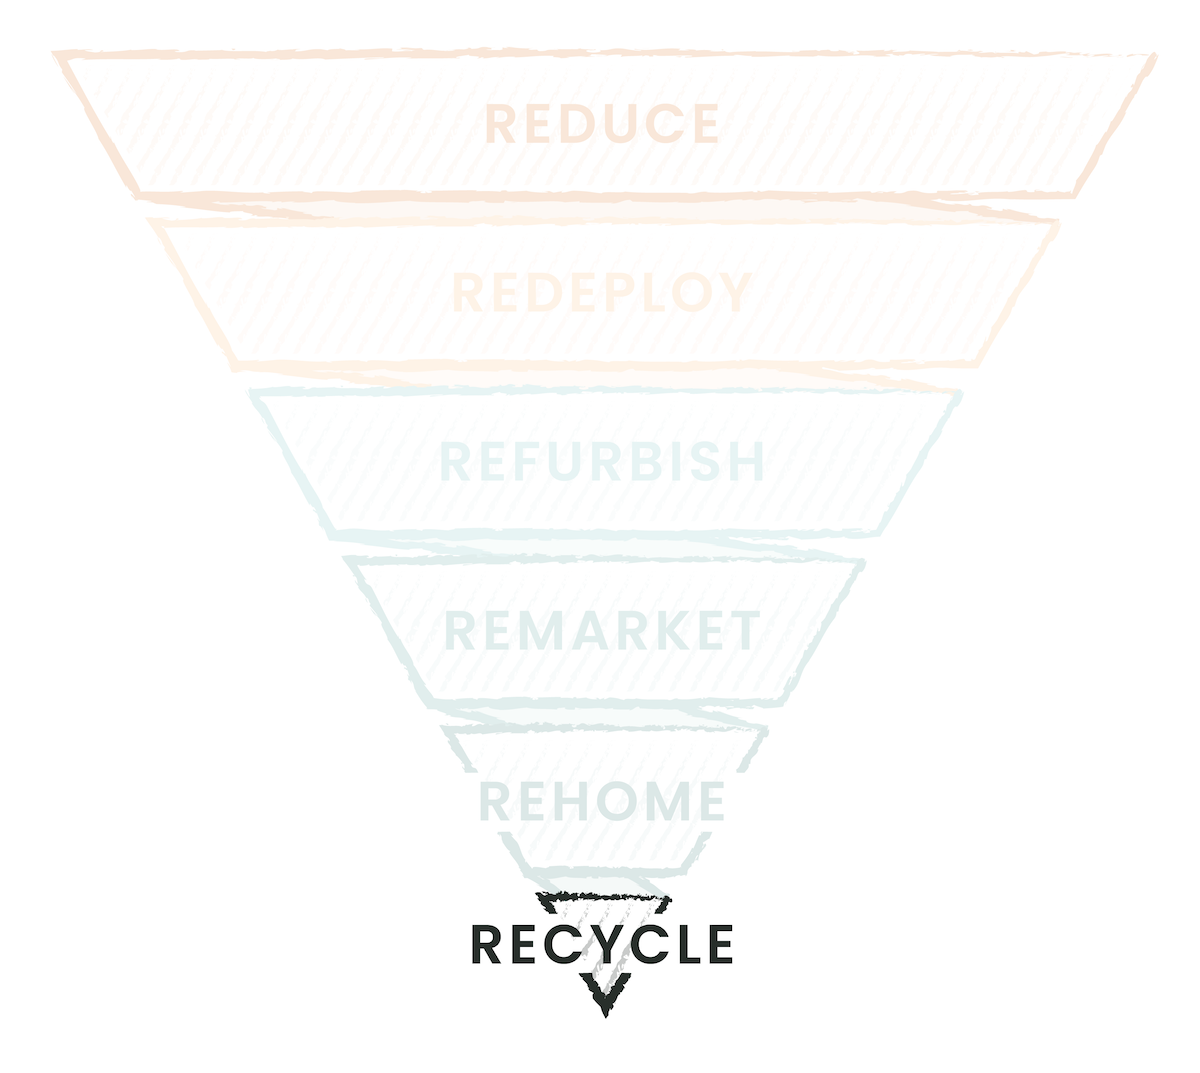 An image of an upside-down triangle shows the sixth layer of the technology recycle pyramid: “Recycle”